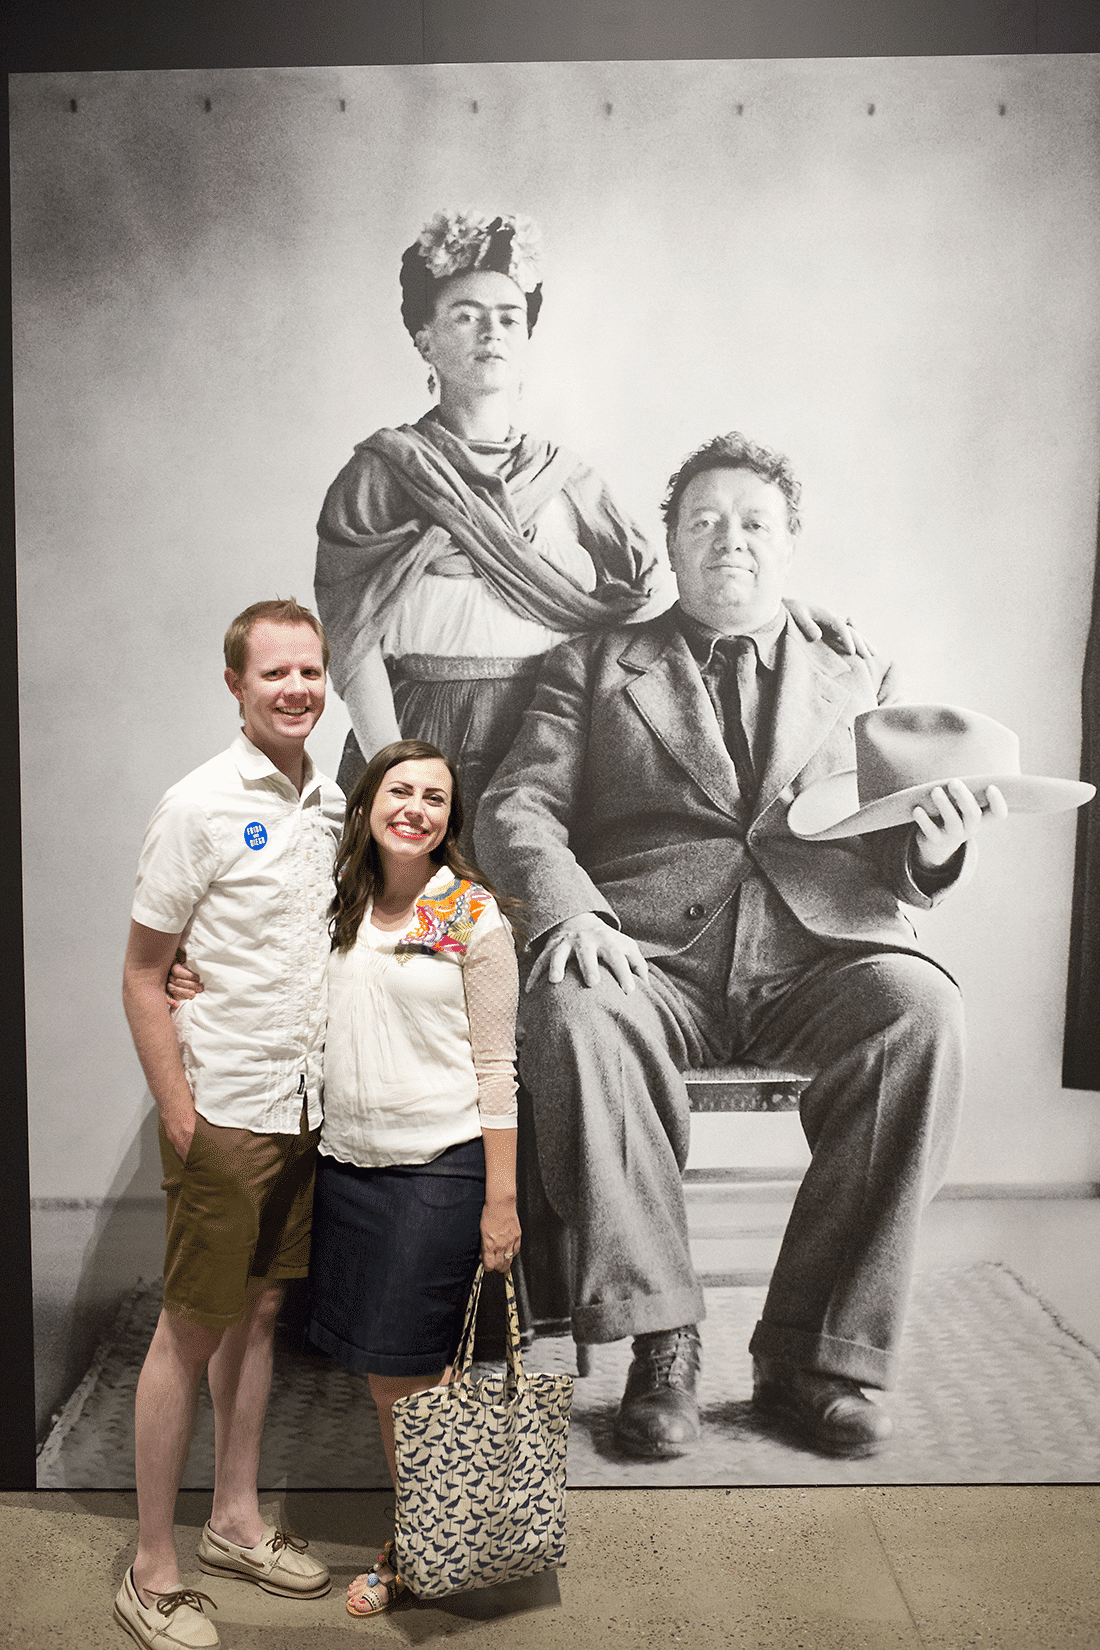 Double Date with Frida and Diego: Visiting Frida Kahlo and Diego Rivera museum art and why this creative date night idea should be on your date night bucket list!